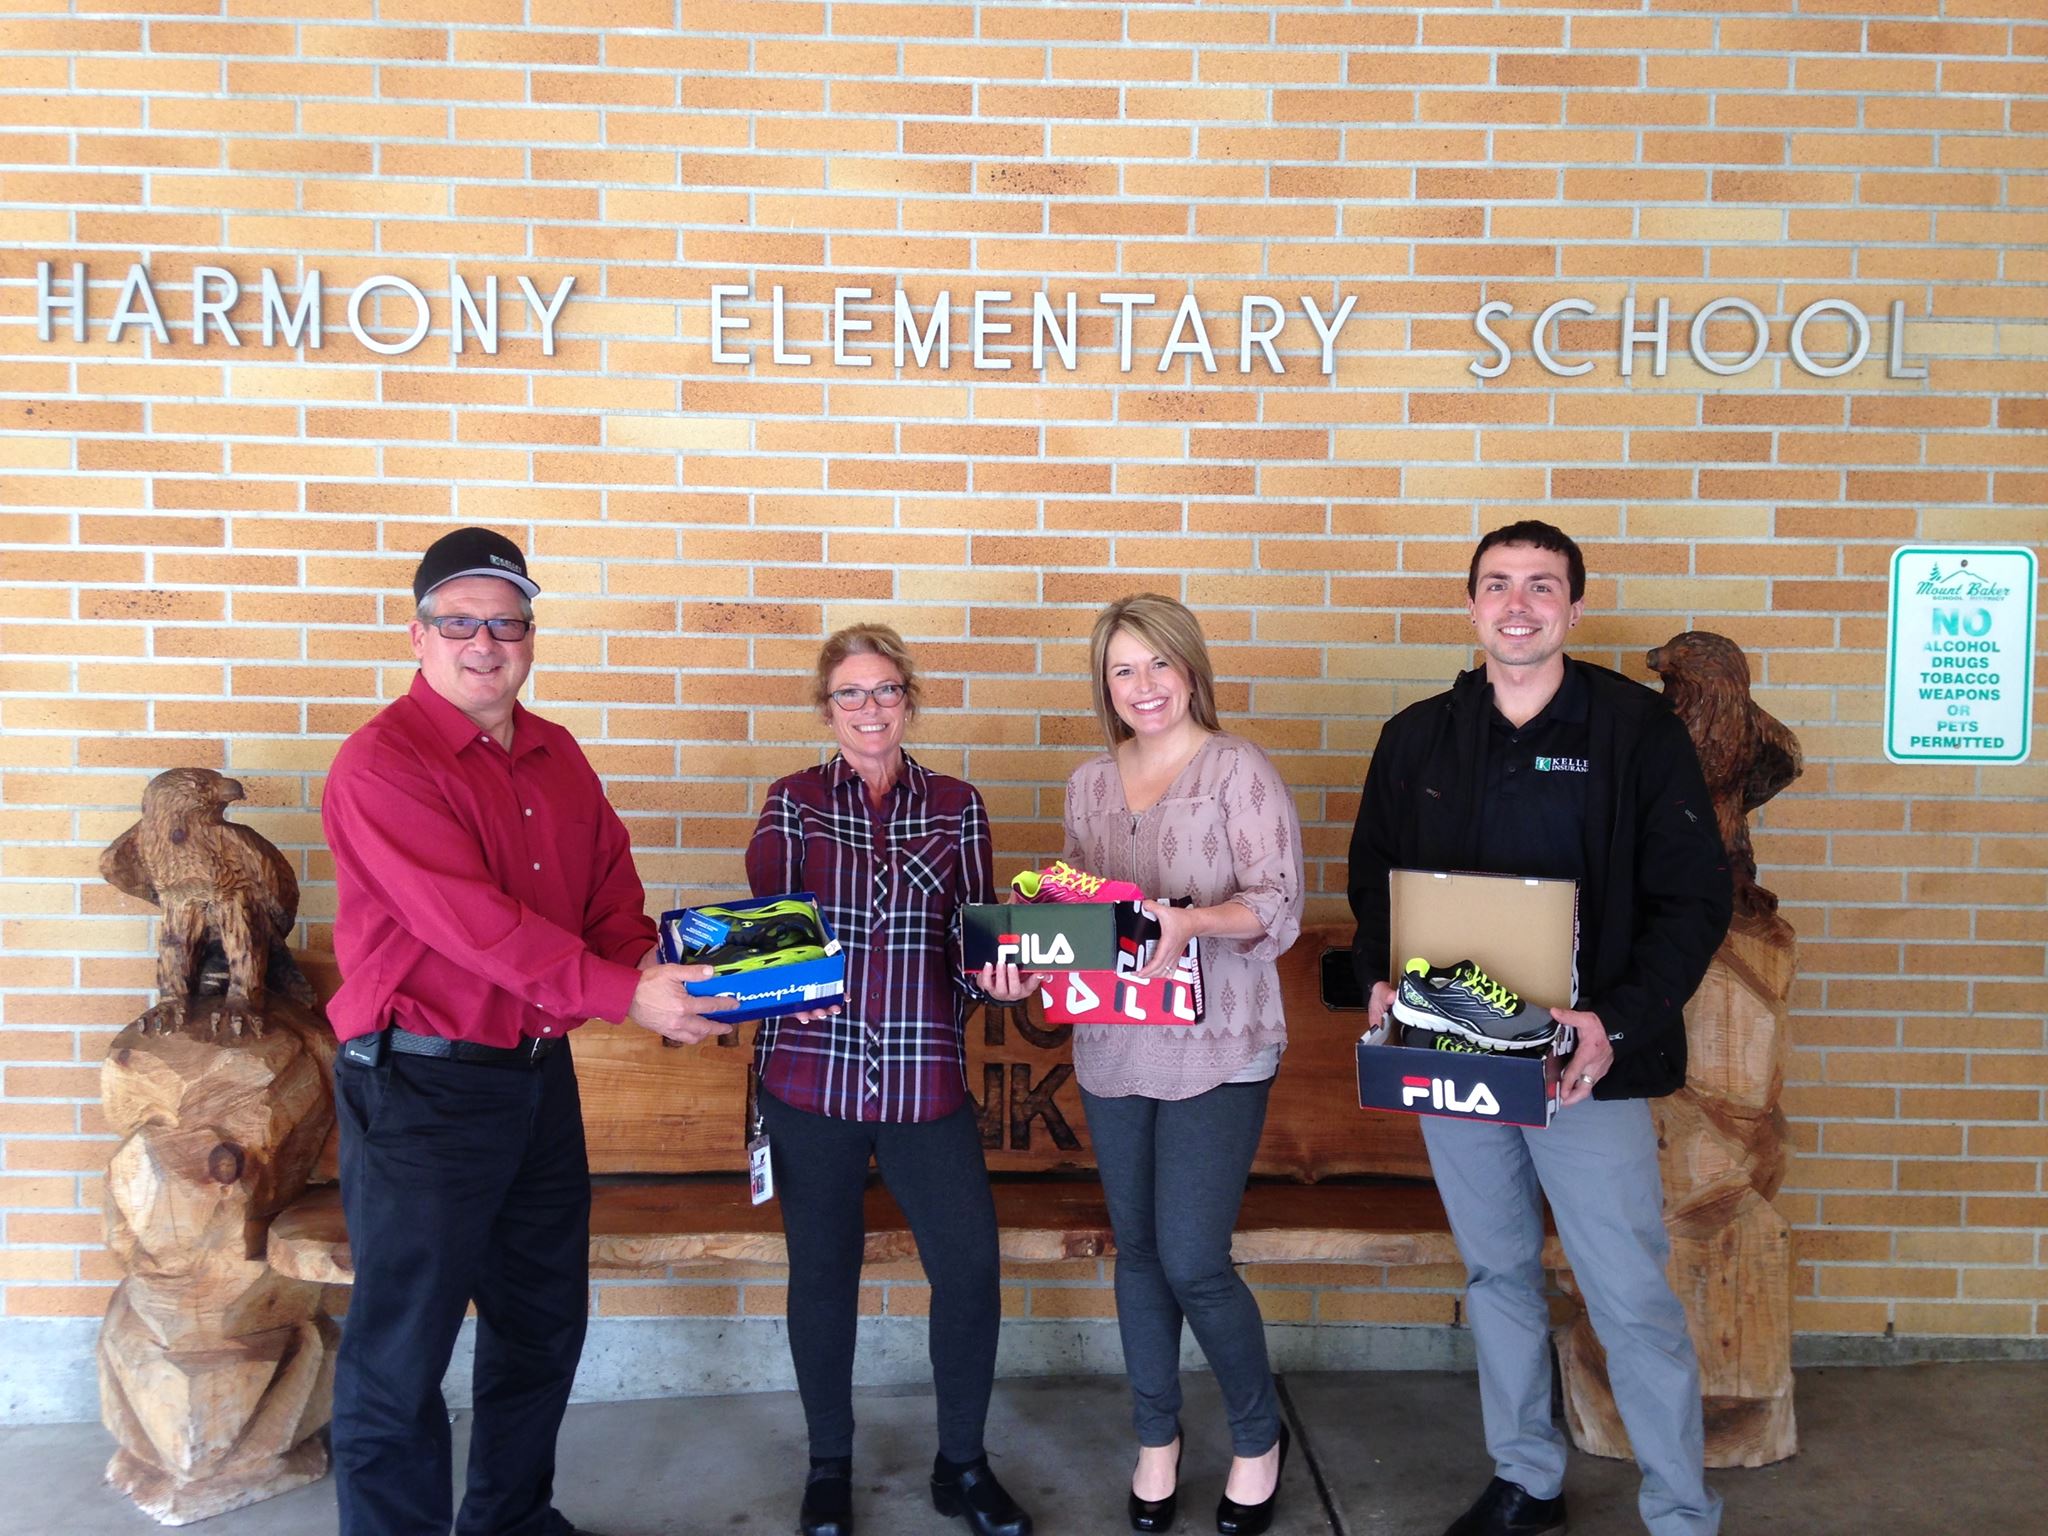 Donating Shoes to Children at Harmony Elementary